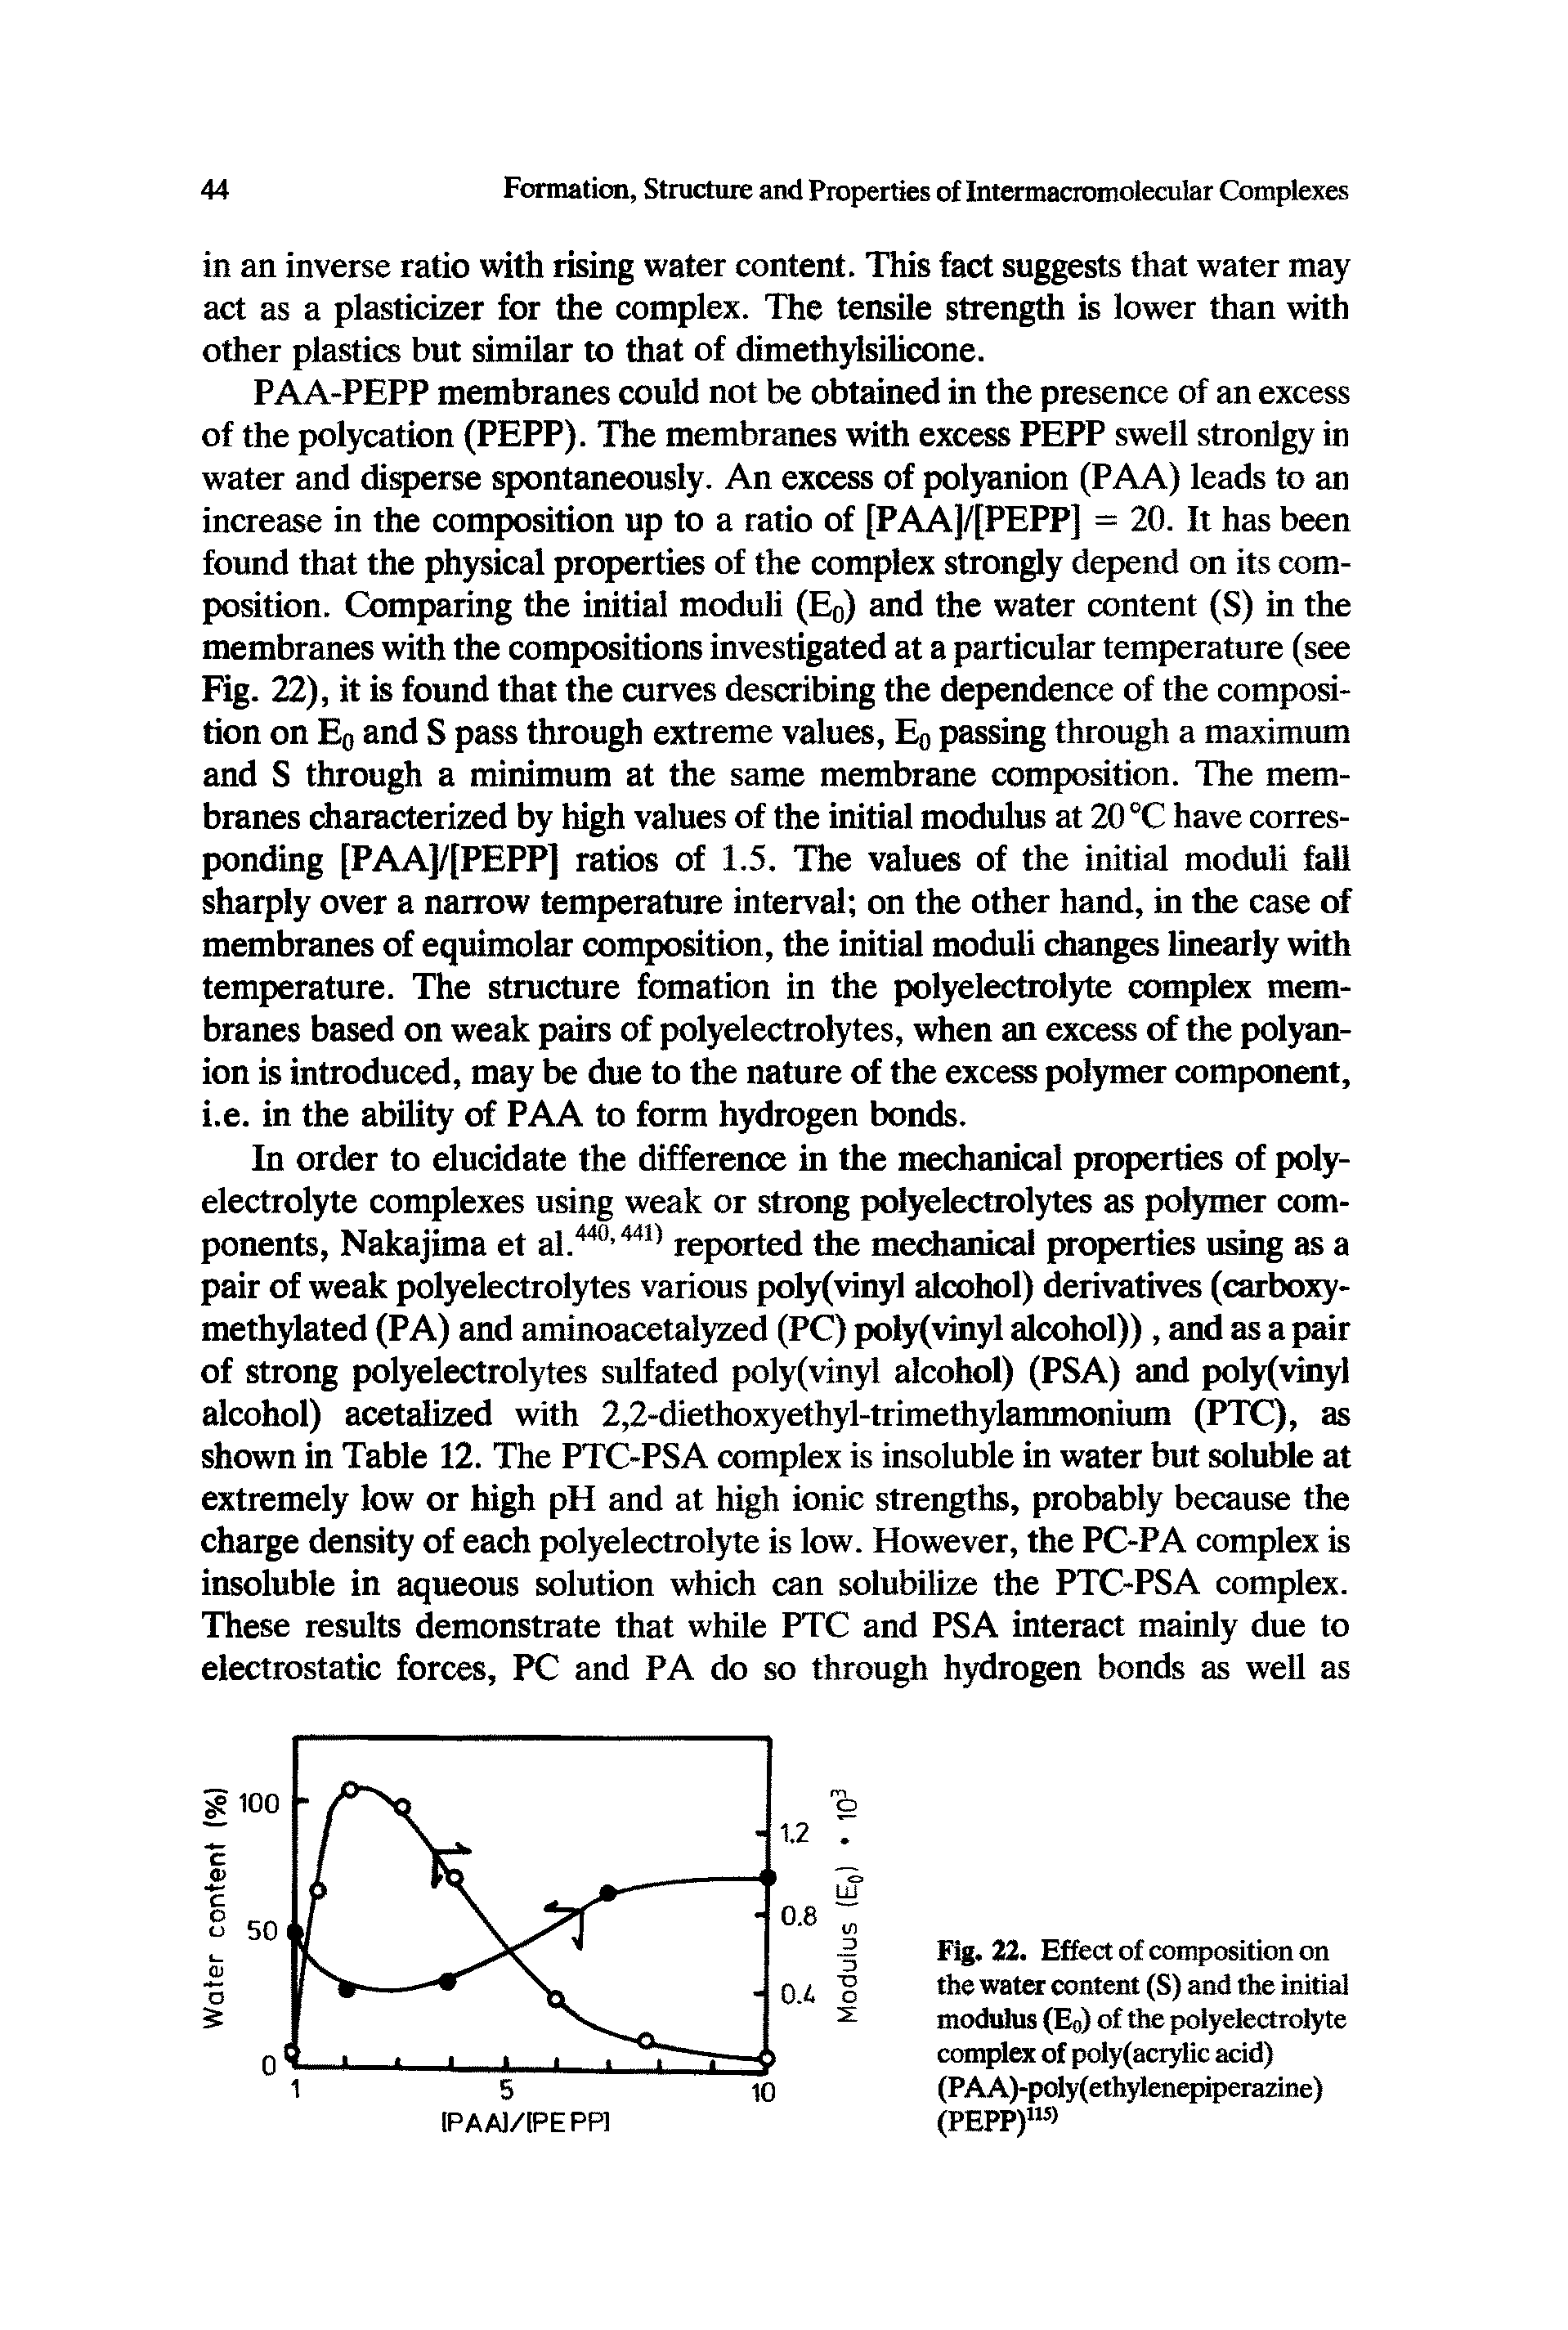 Fig. 22. Effect of composition on the water content (S) and the initial modulus (E0) of the polyelectroiyte complex of polyfacrylic acid) (PAA)-poly(ethylenepiperazine)...